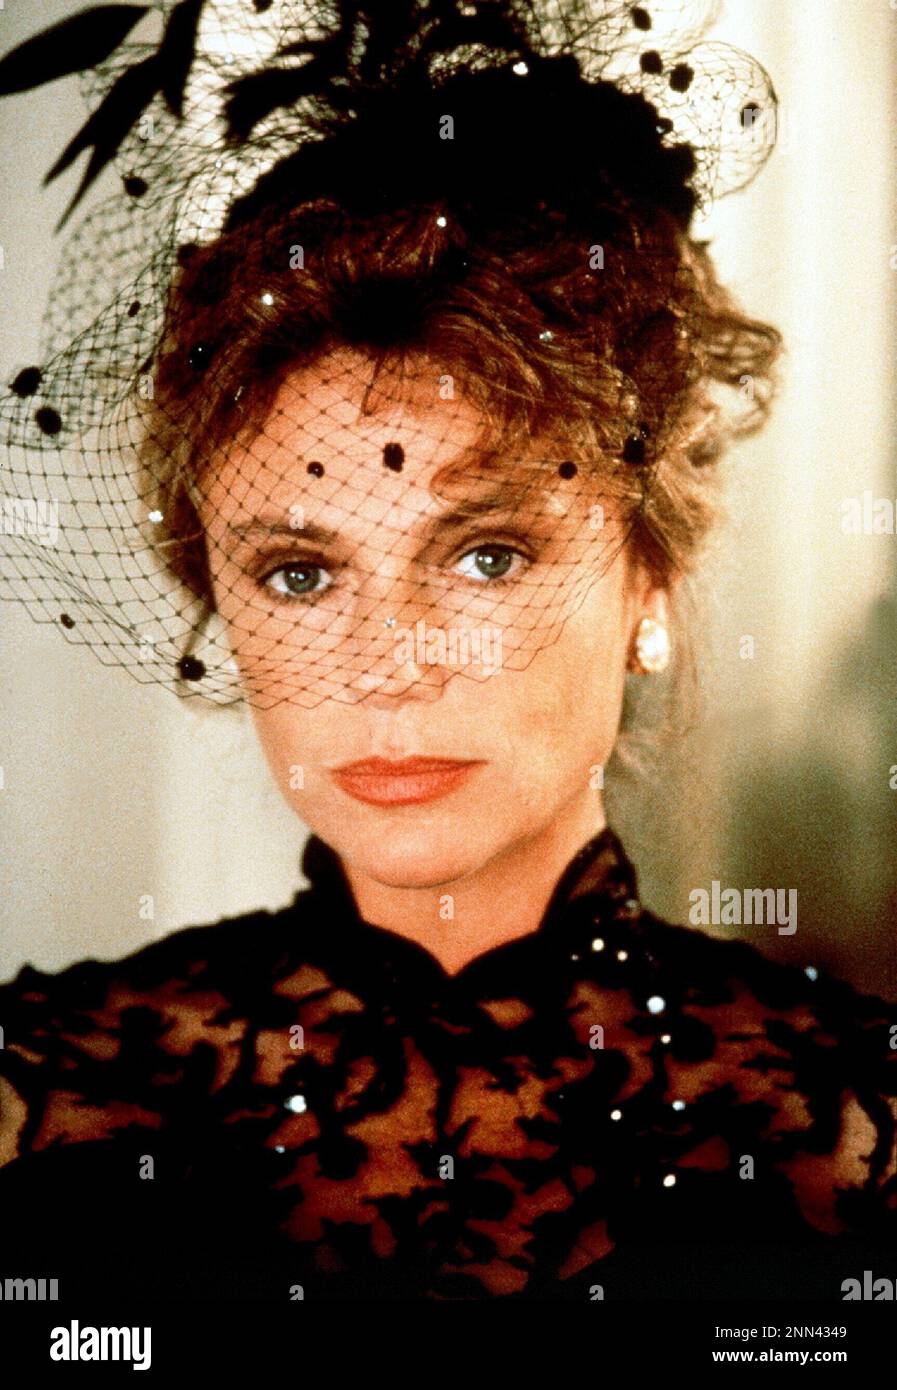 JACQUELINE BISSET in SCENES FROM THE CLASS STRUGGLE IN BEVERLY HILLS (1989), directed by PAUL BARTEL. Credit: NORTH STREET/CINECOM / Album Stock Photo